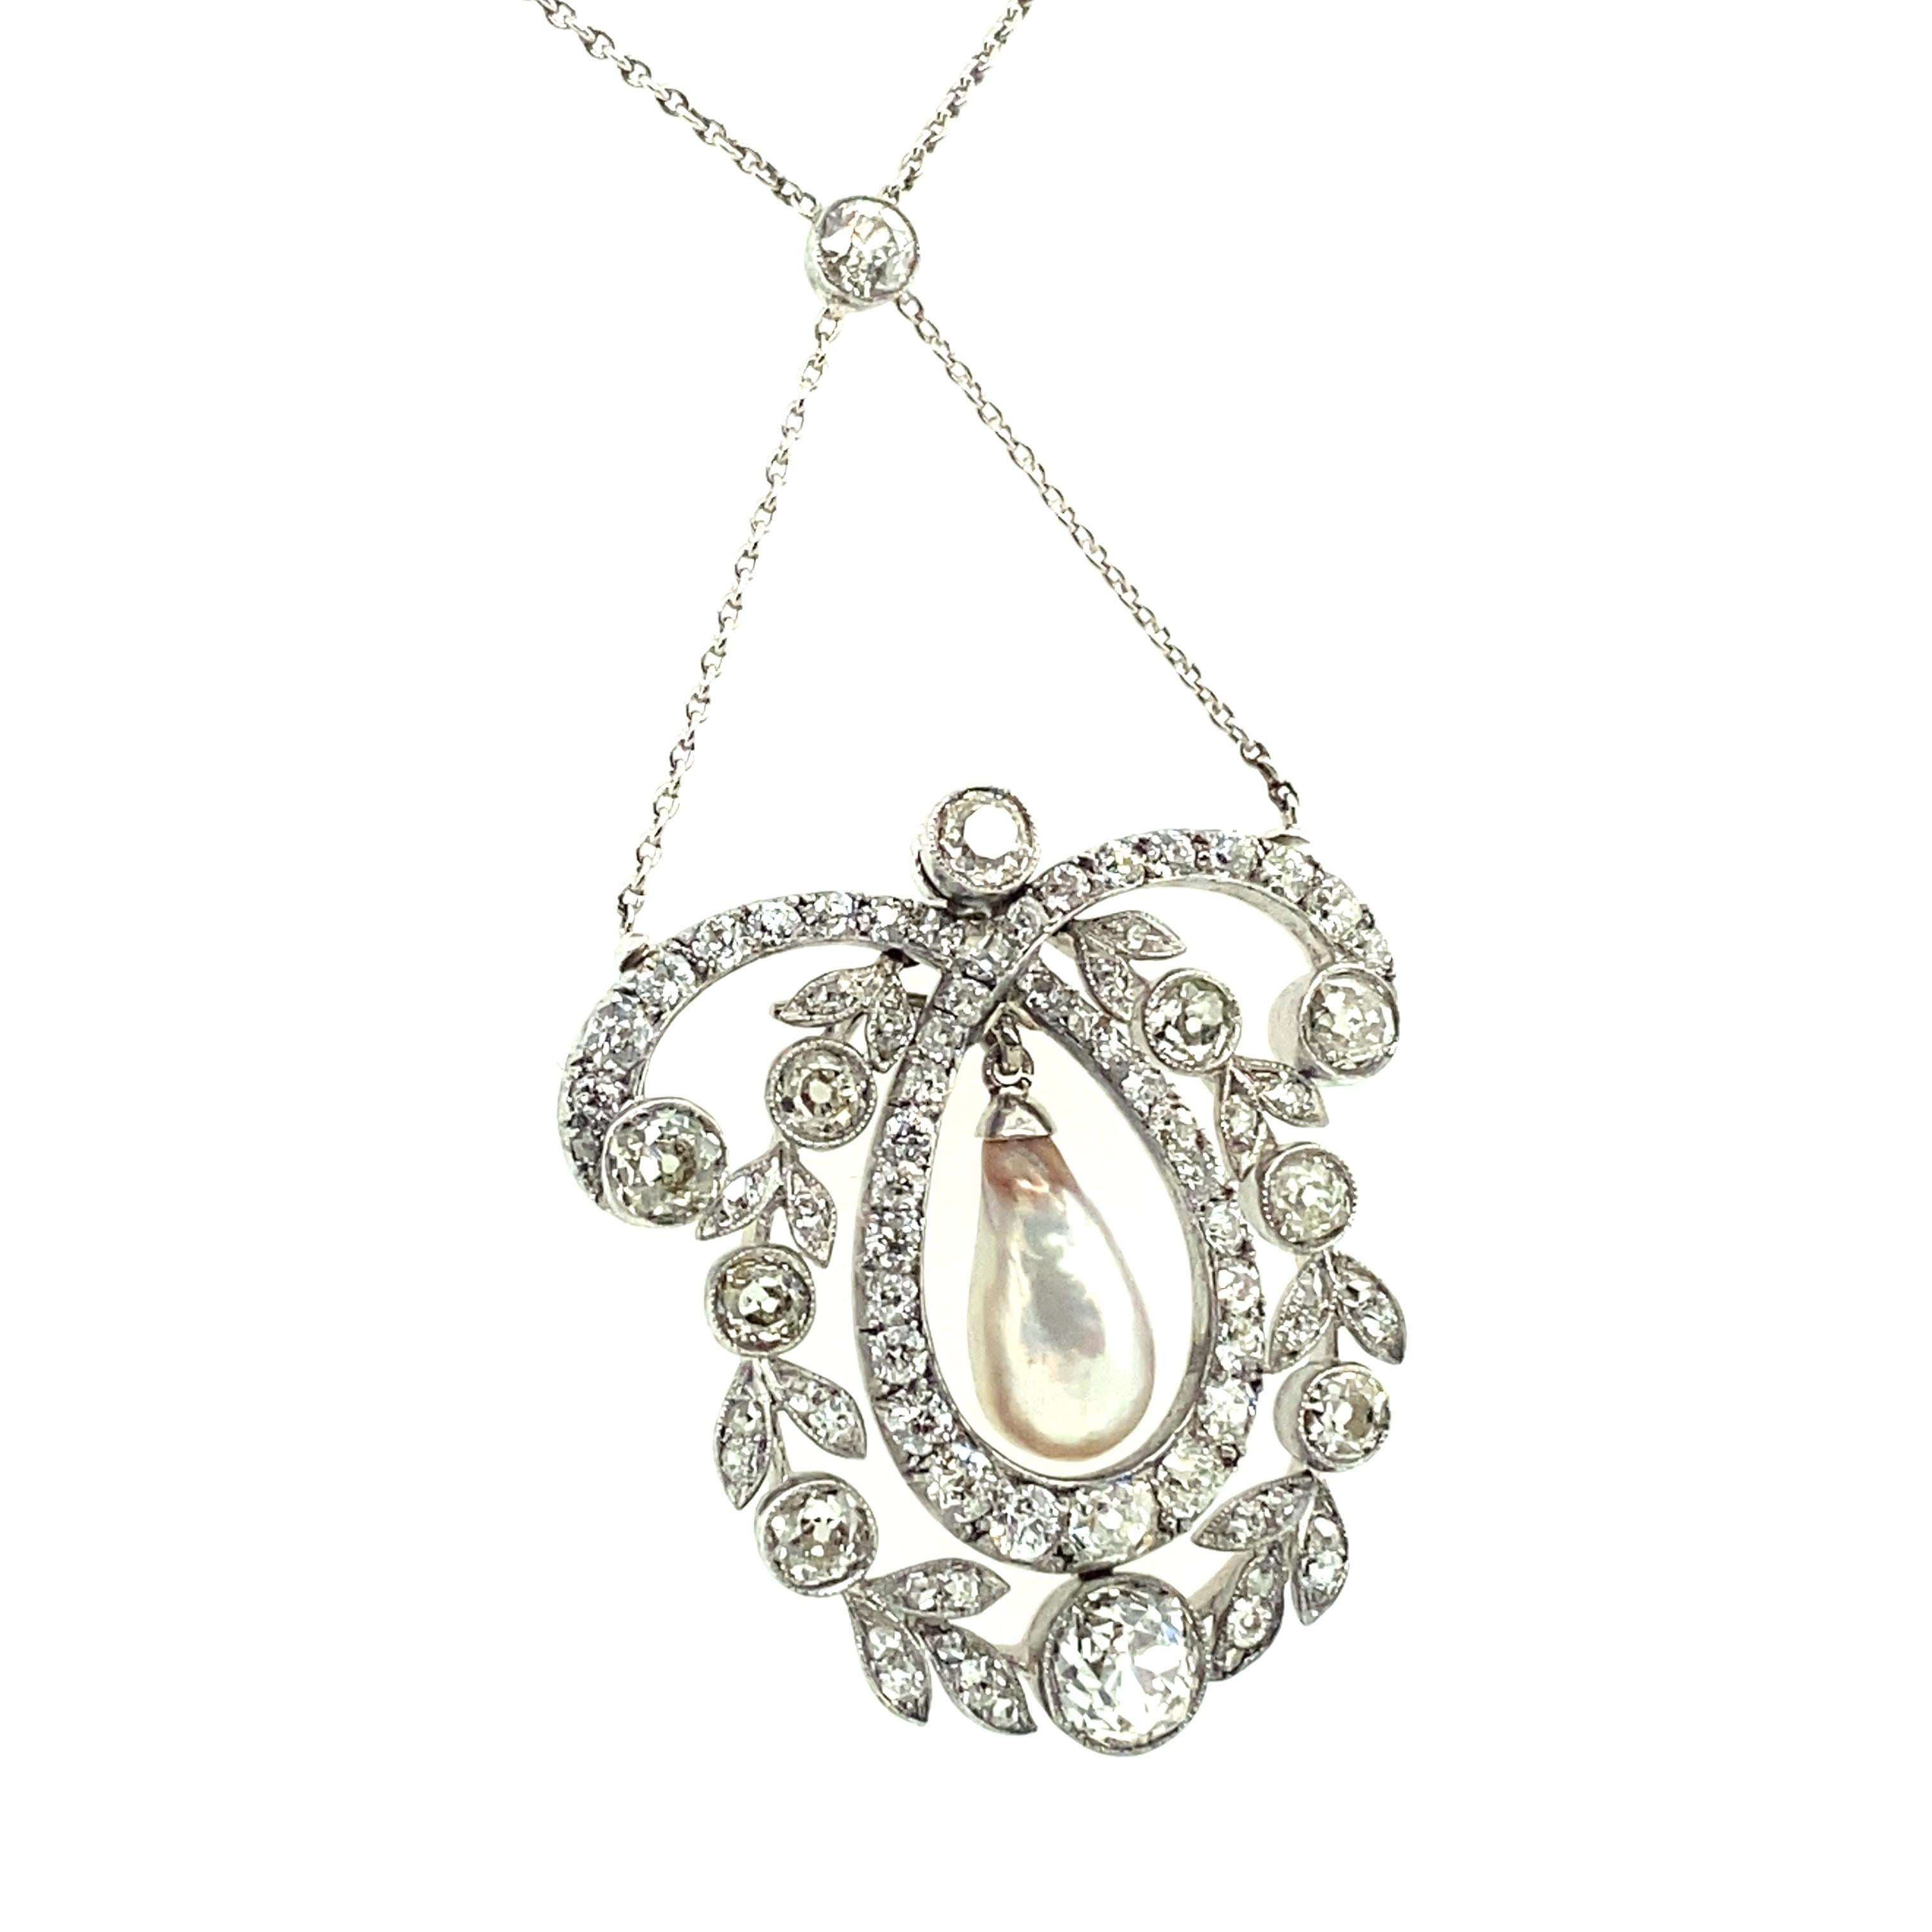 Unique Edwardian Natural Pearl and Diamond Necklace in Platinum 950 1